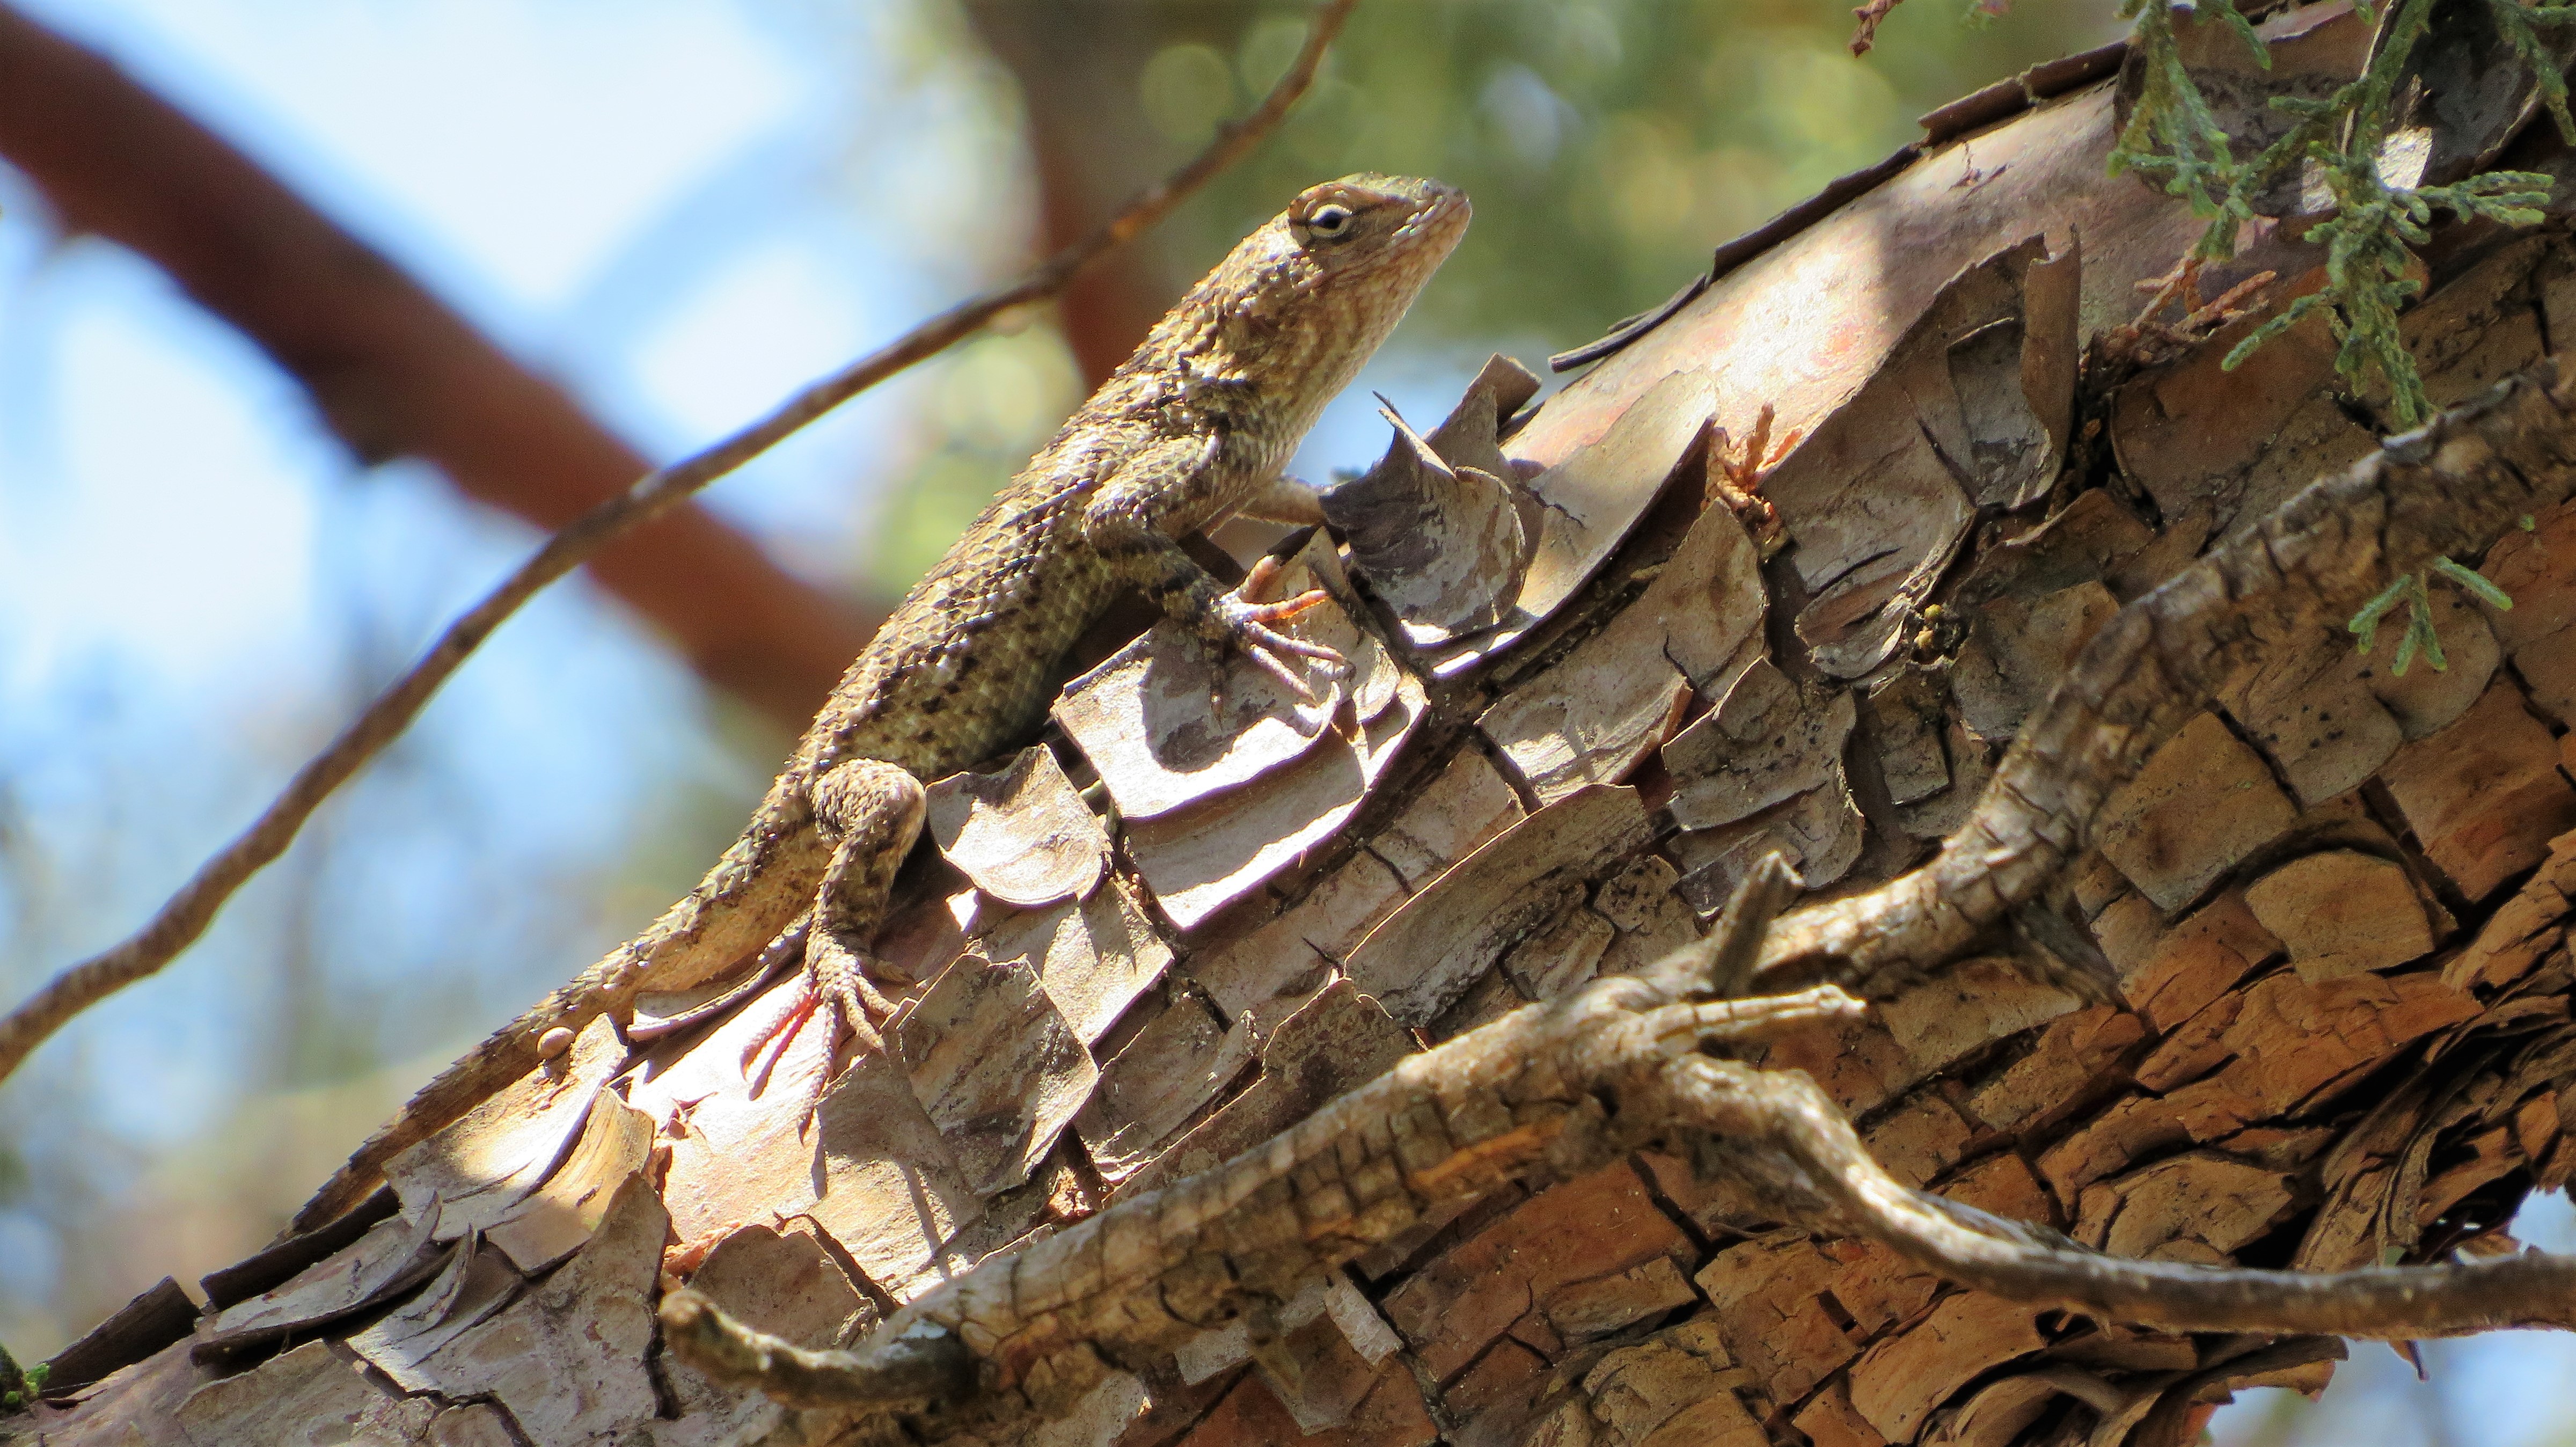 Photo by YVETTE HOFFMAN  |  Lizard caught my eye as he was moving I thought it was part of the tree branch. He camouflaged himself really well and he did it with smile 